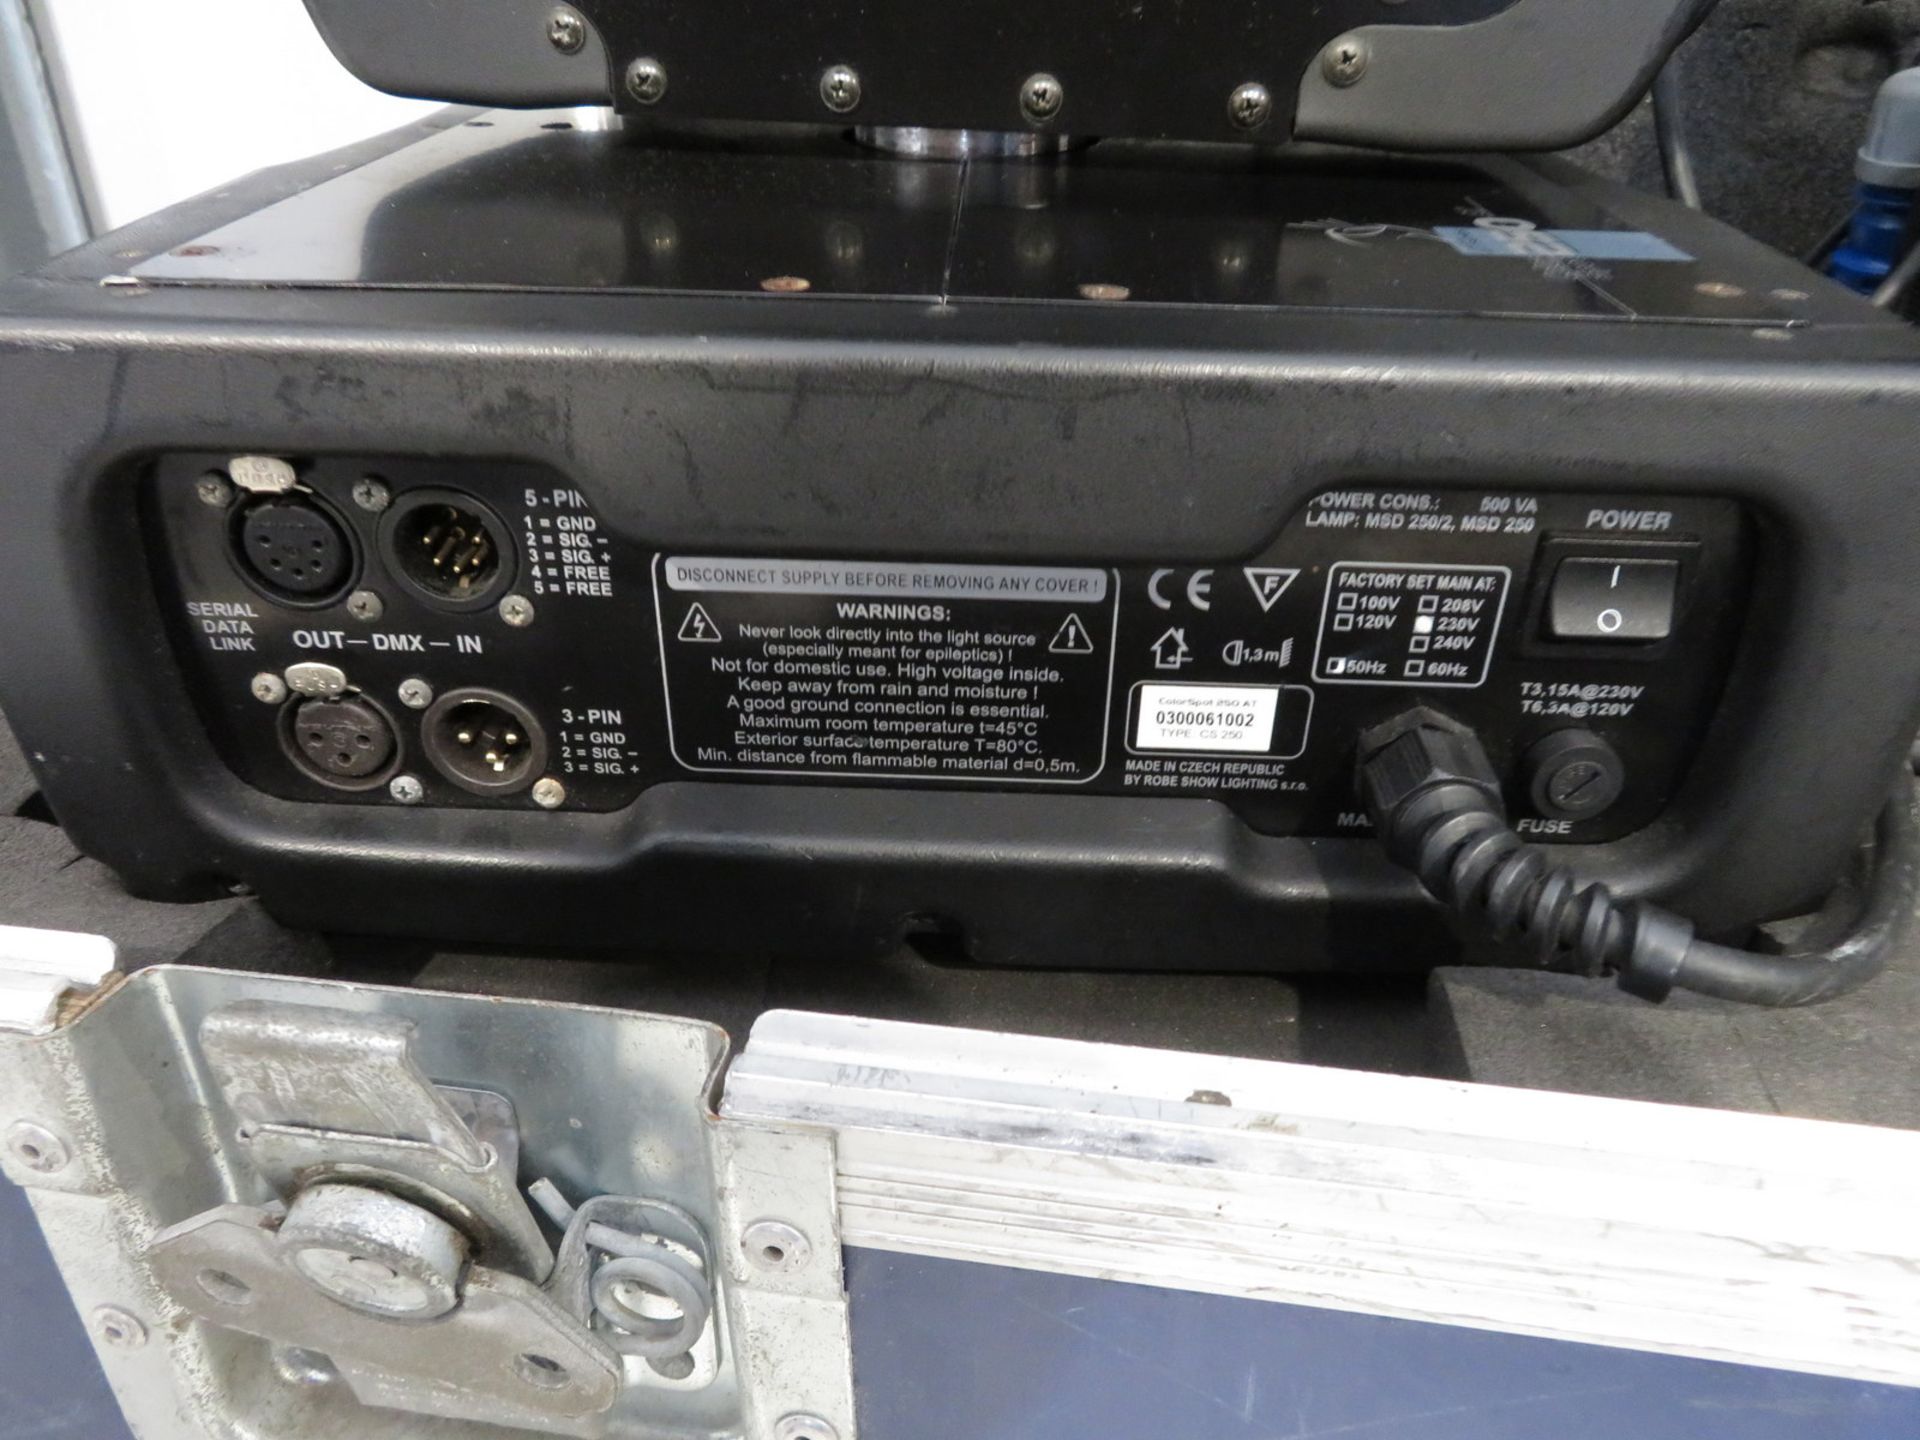 Pair of Robe Colourspot 250 AT Series in flightcase. Includes hanging clamps. Working con - Image 7 of 9